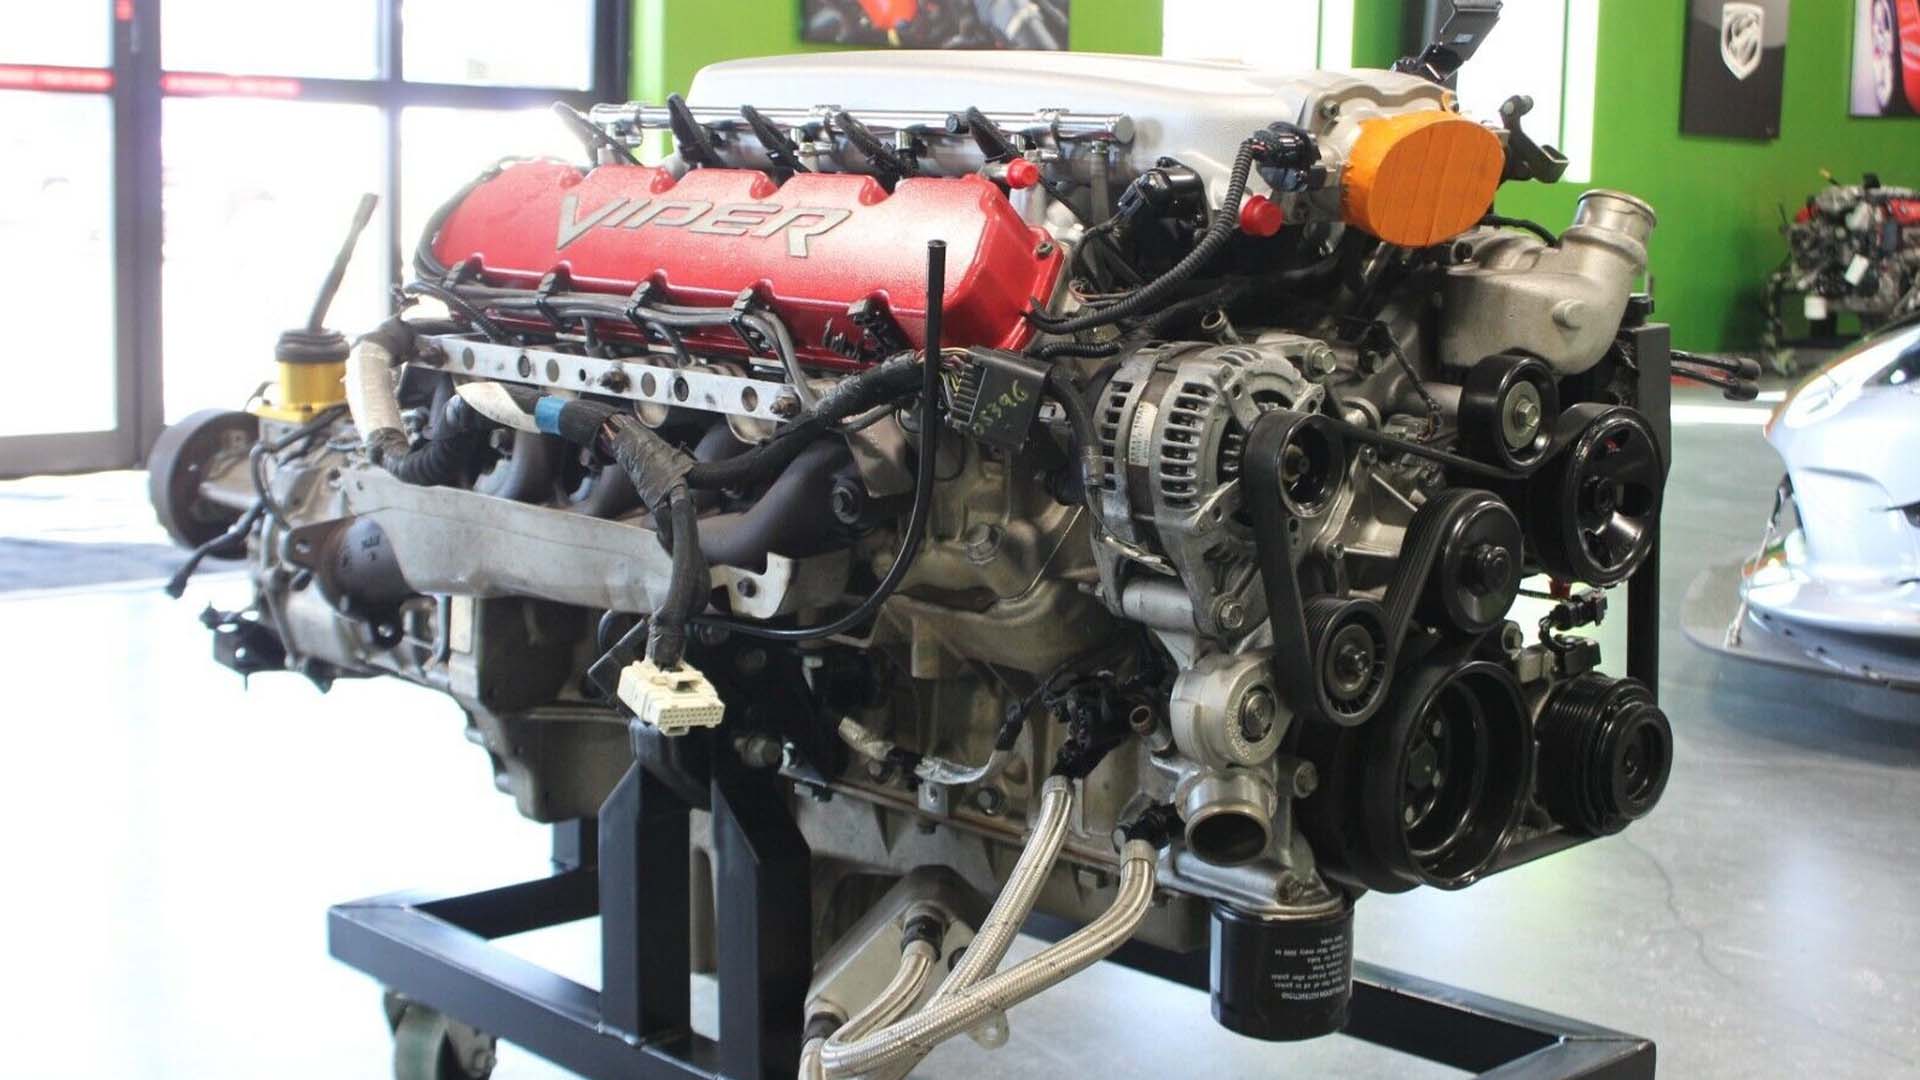 Need an SRT Ram 8.3L V10? This Shop Has Five for Sale